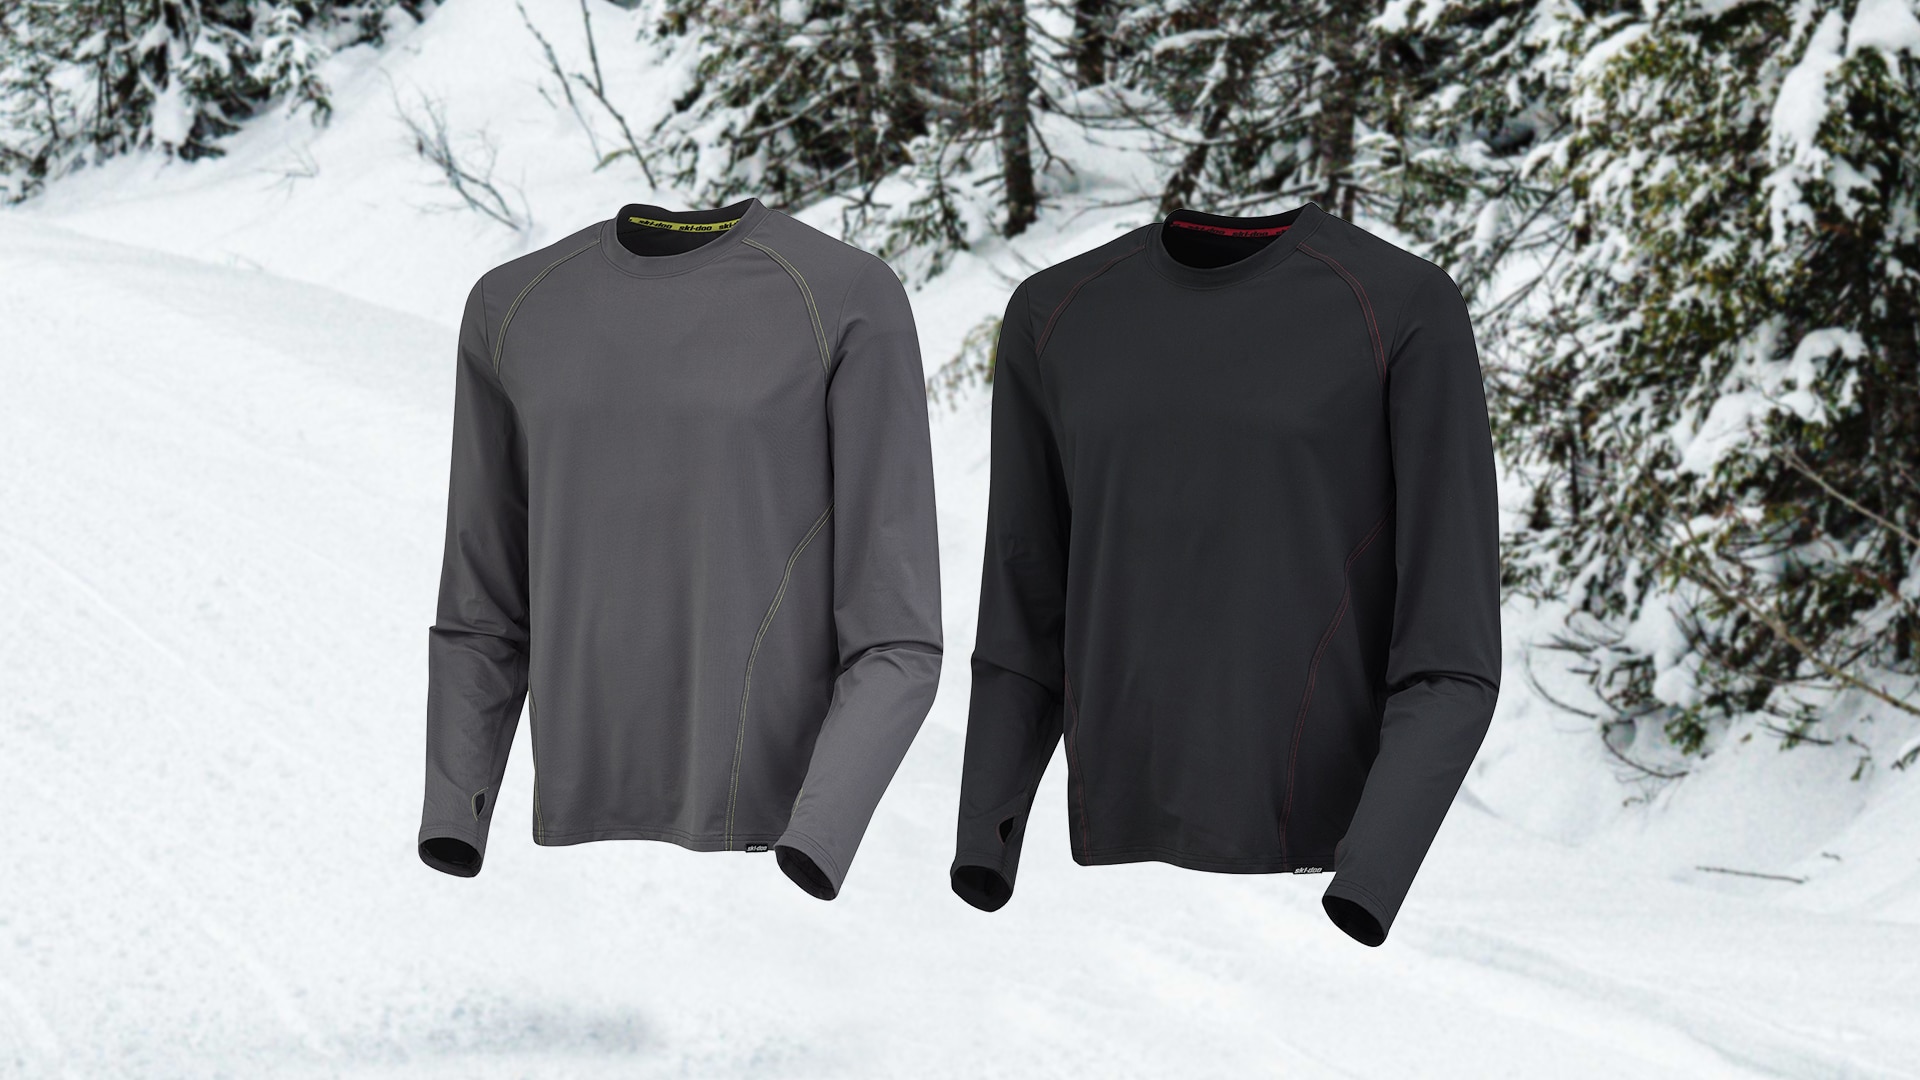 Warm base layers for snowmobiling